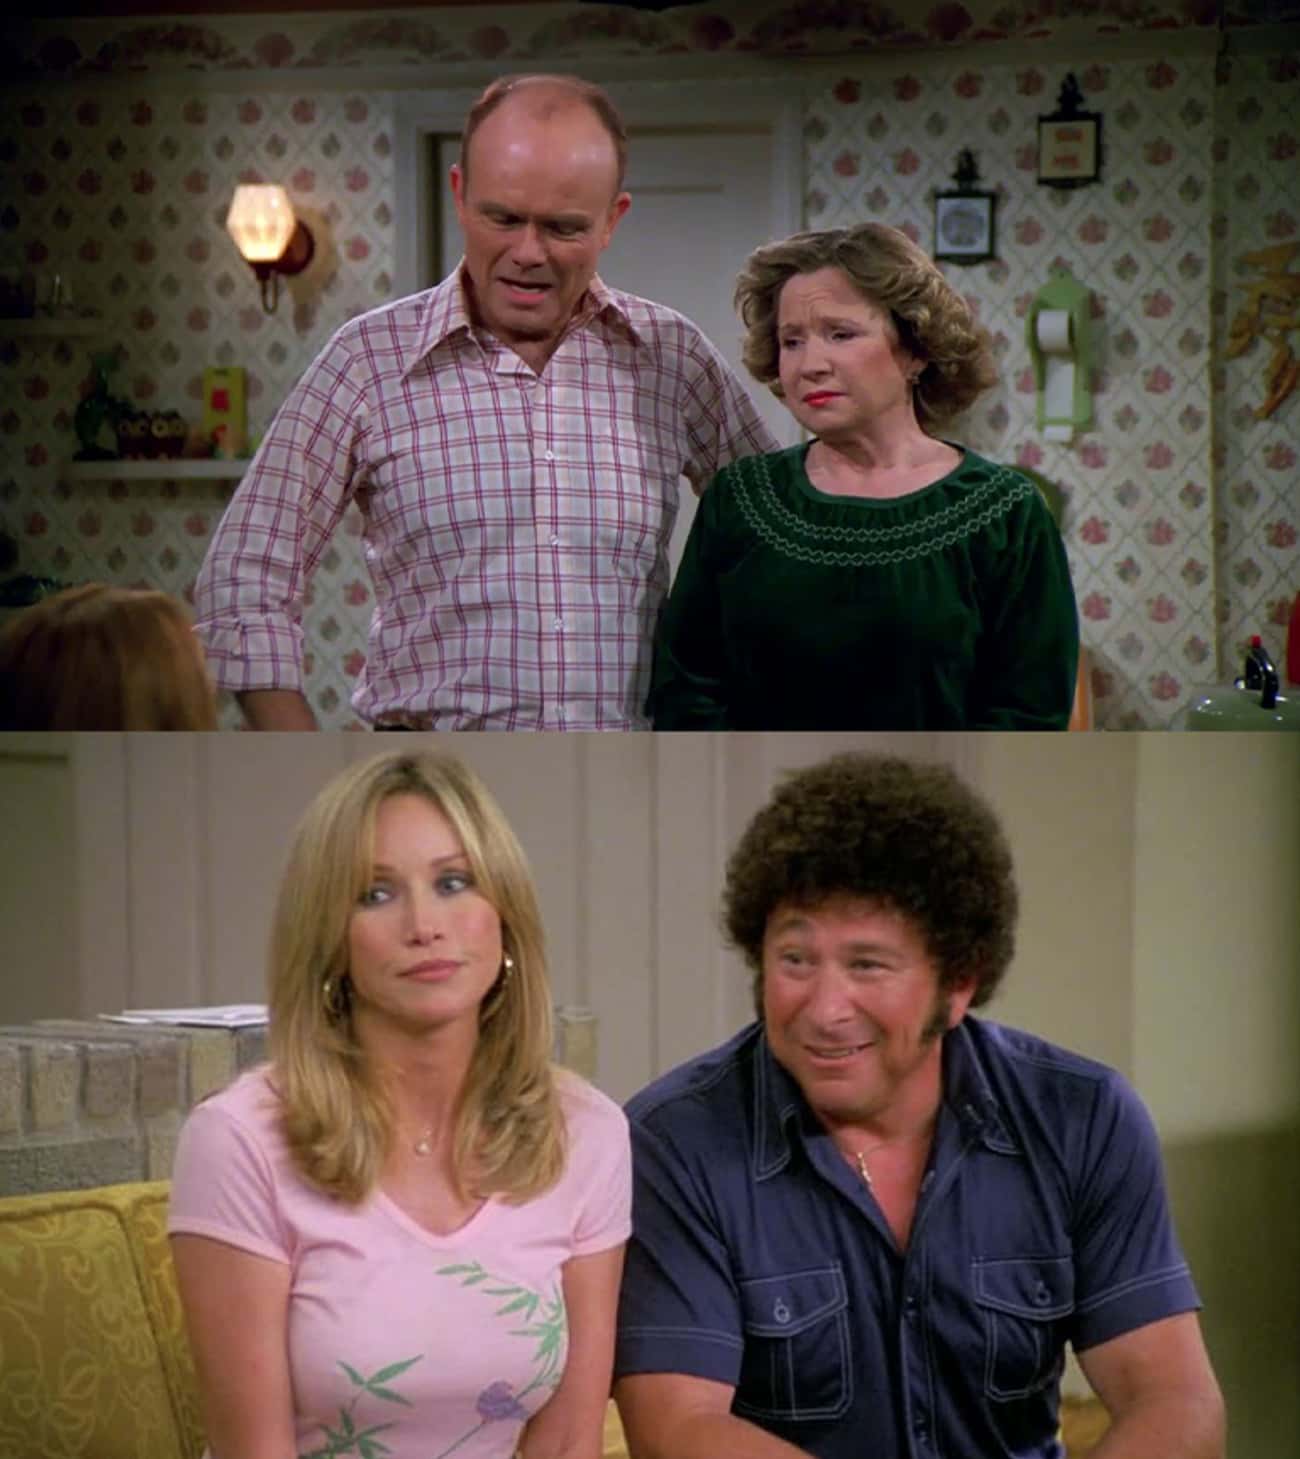 The Differences Between The Two Main Parents On 'That '70s Show' Is To Juxtapose Sitcom Cliches With Reality